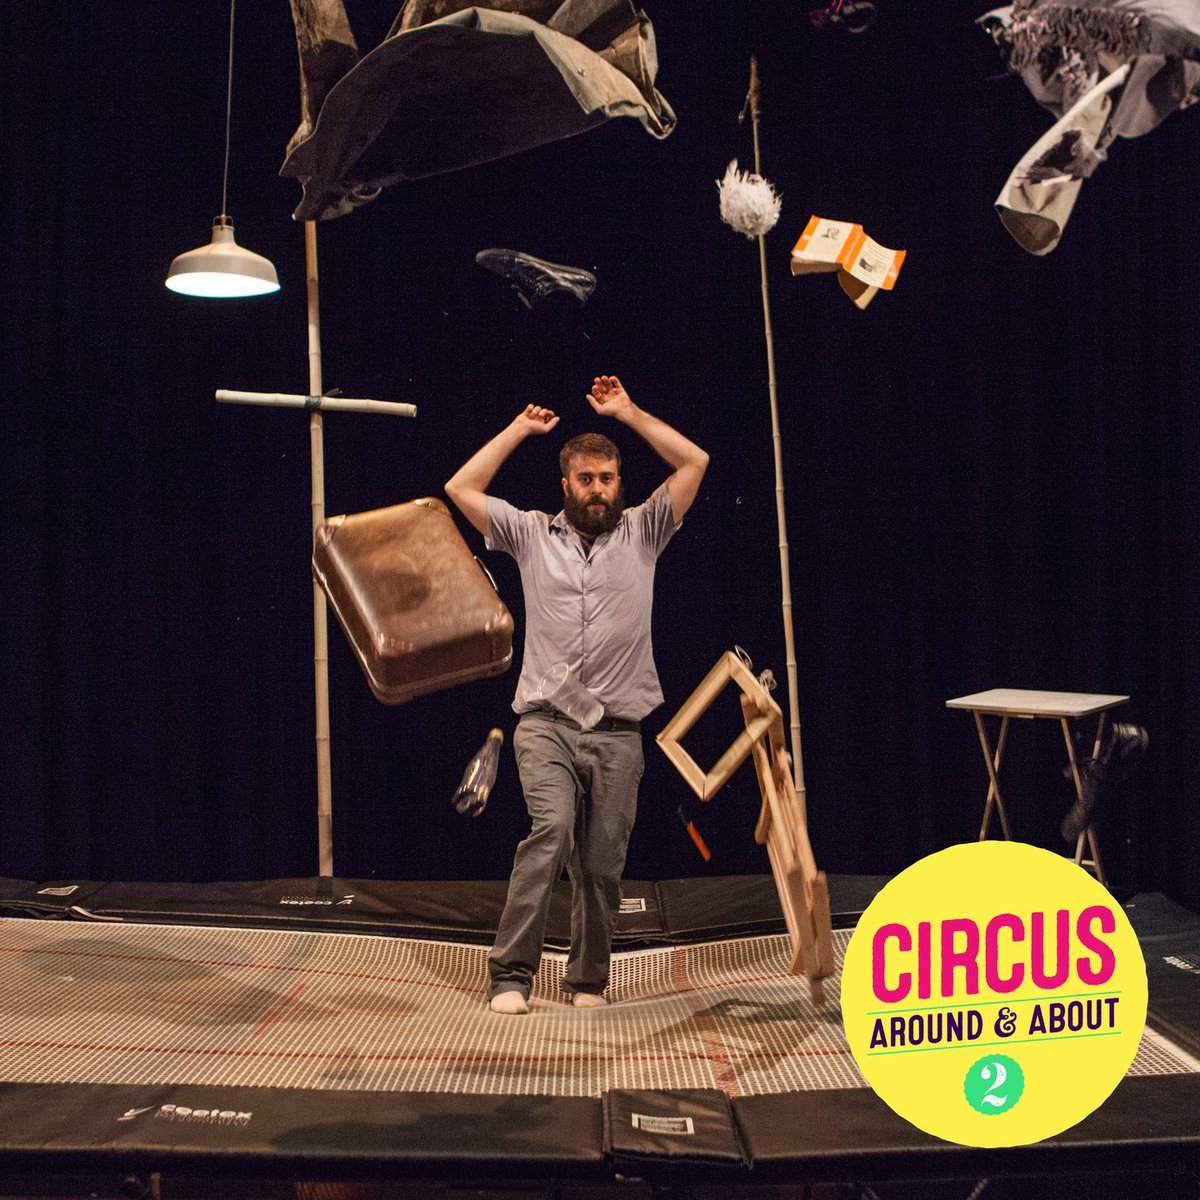 A circus show like no other! Max lives on a trampoline, with only his little pet bird for company. Follow their funny, bouncing daily routine, with breathtaking trampoline skills & hilarious clowning, in a brilliant and unique new show for all the family. bit.ly/4bqNXEU